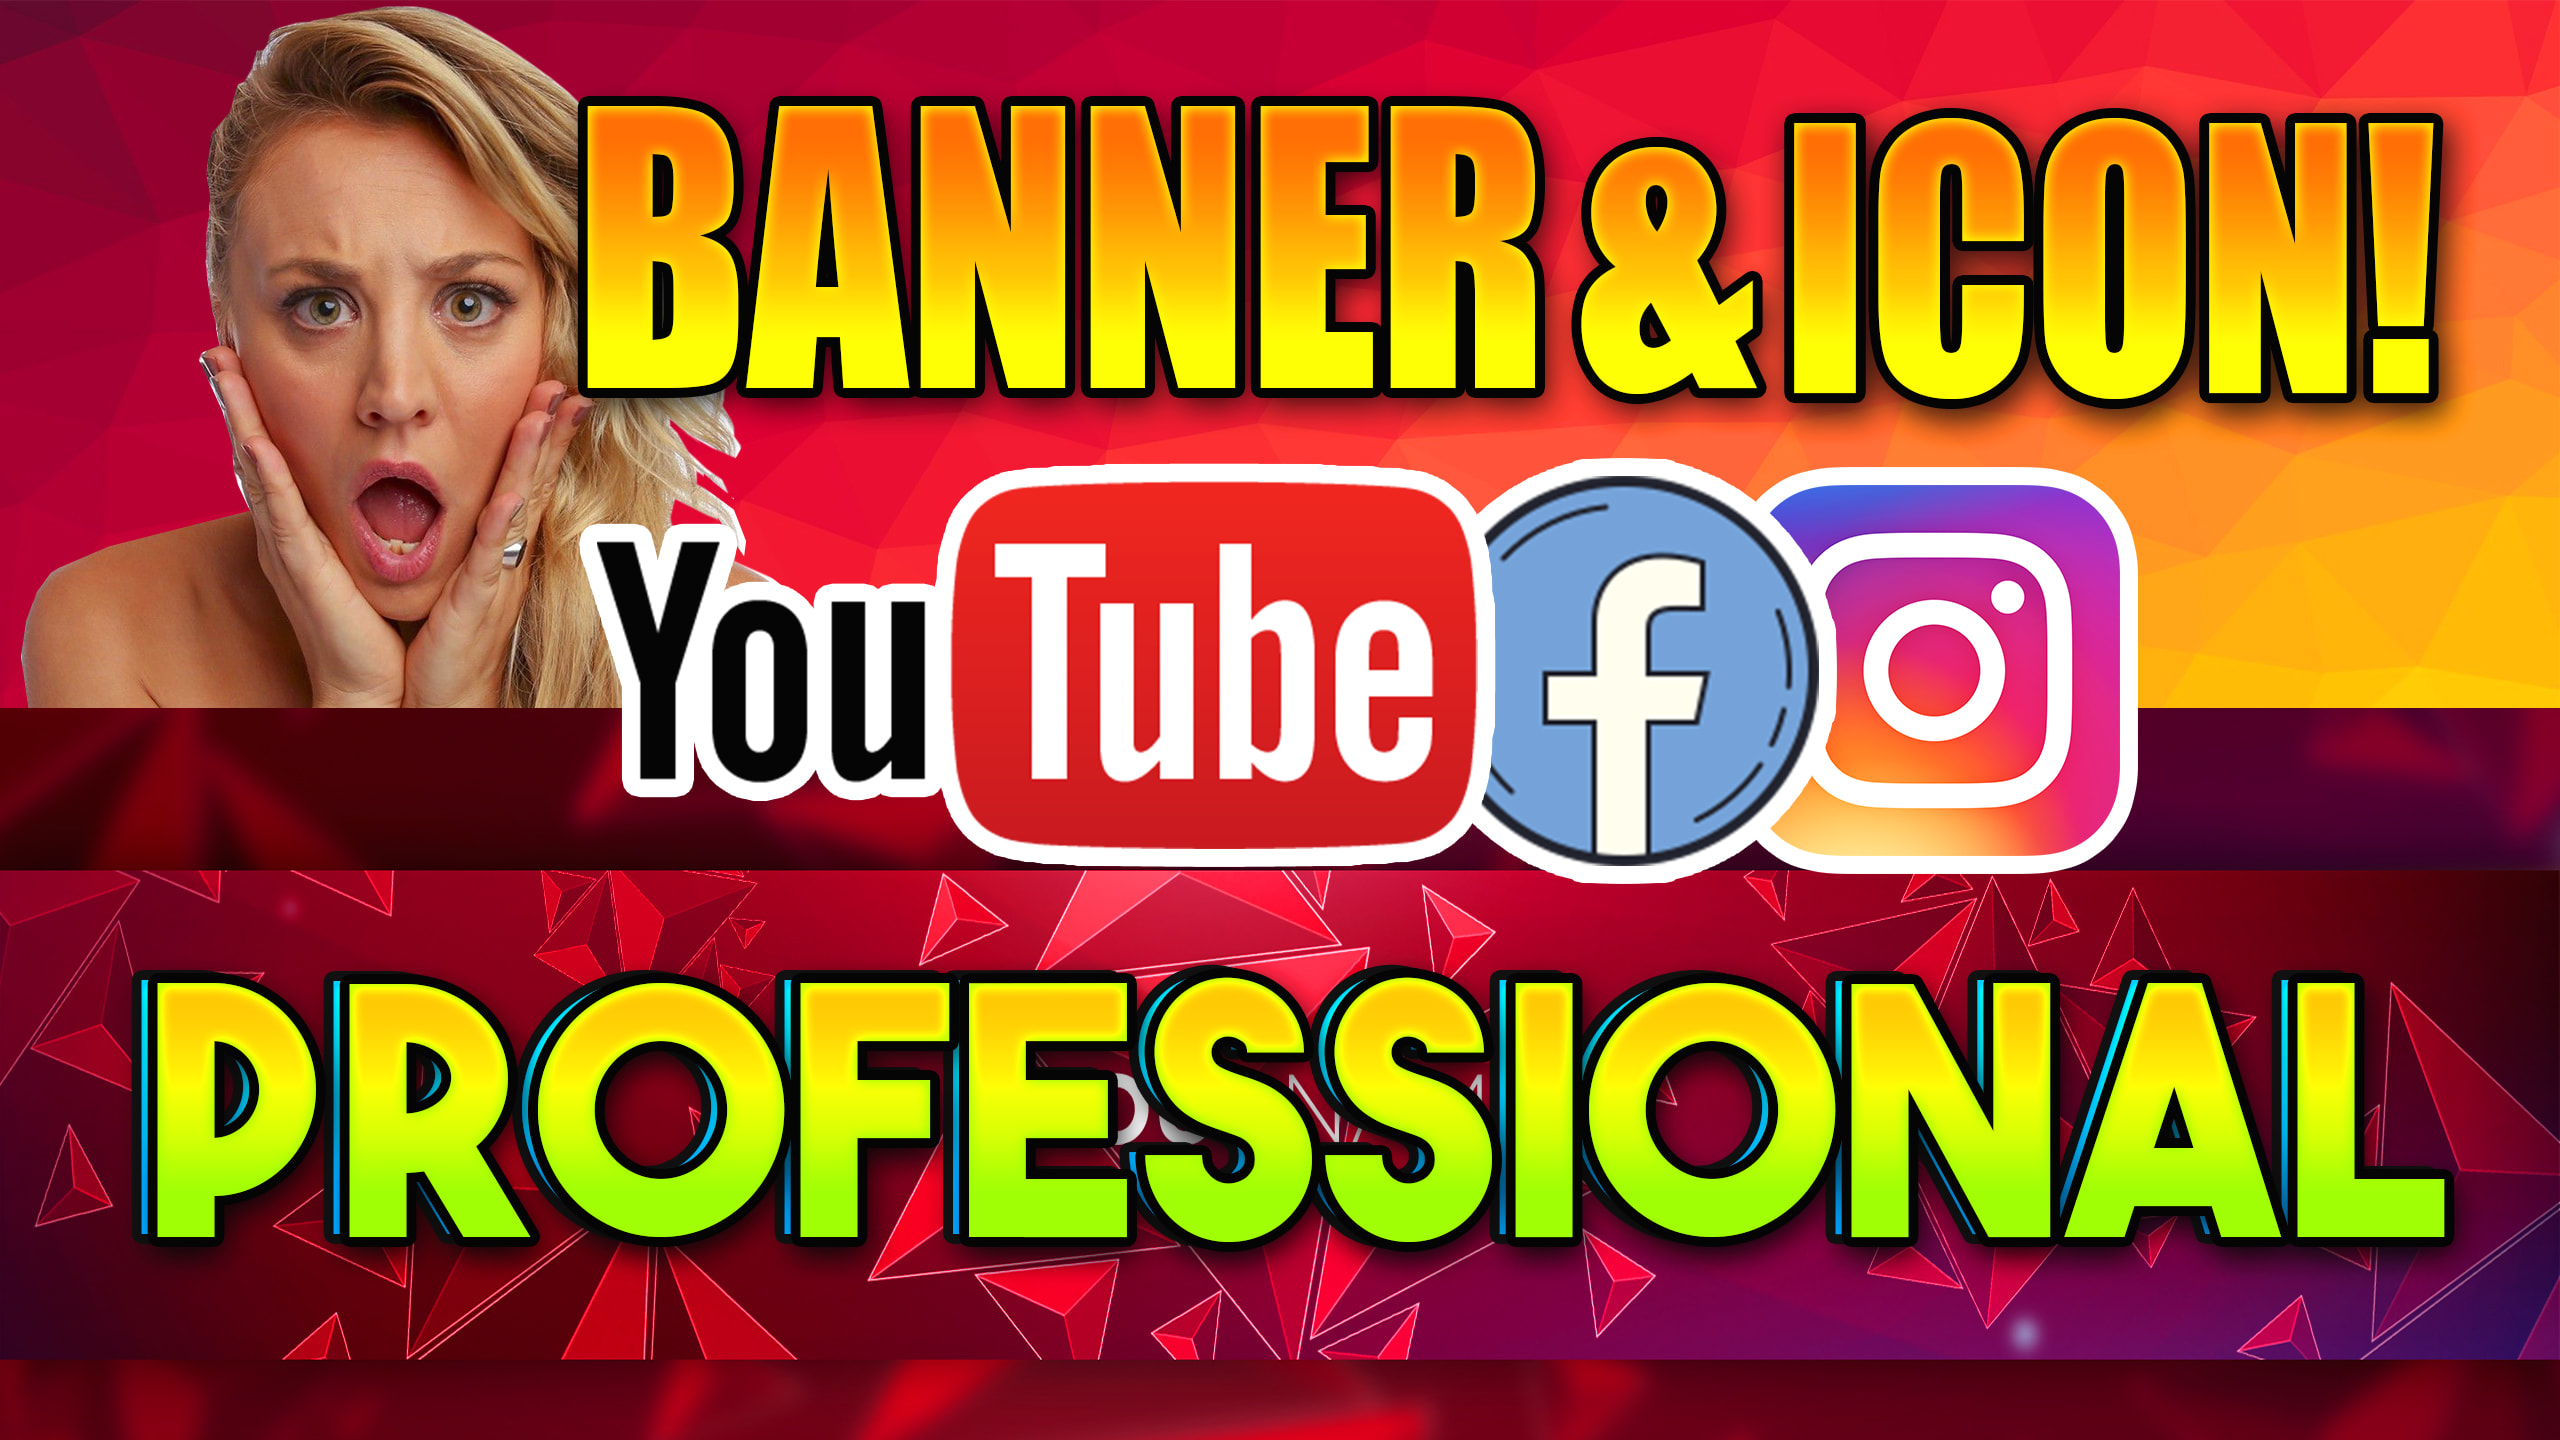 Create An Amazing Banner With Icon For Your Social Media By Thekingalex - chitownterrance3 live the best roblox live streamer facebook